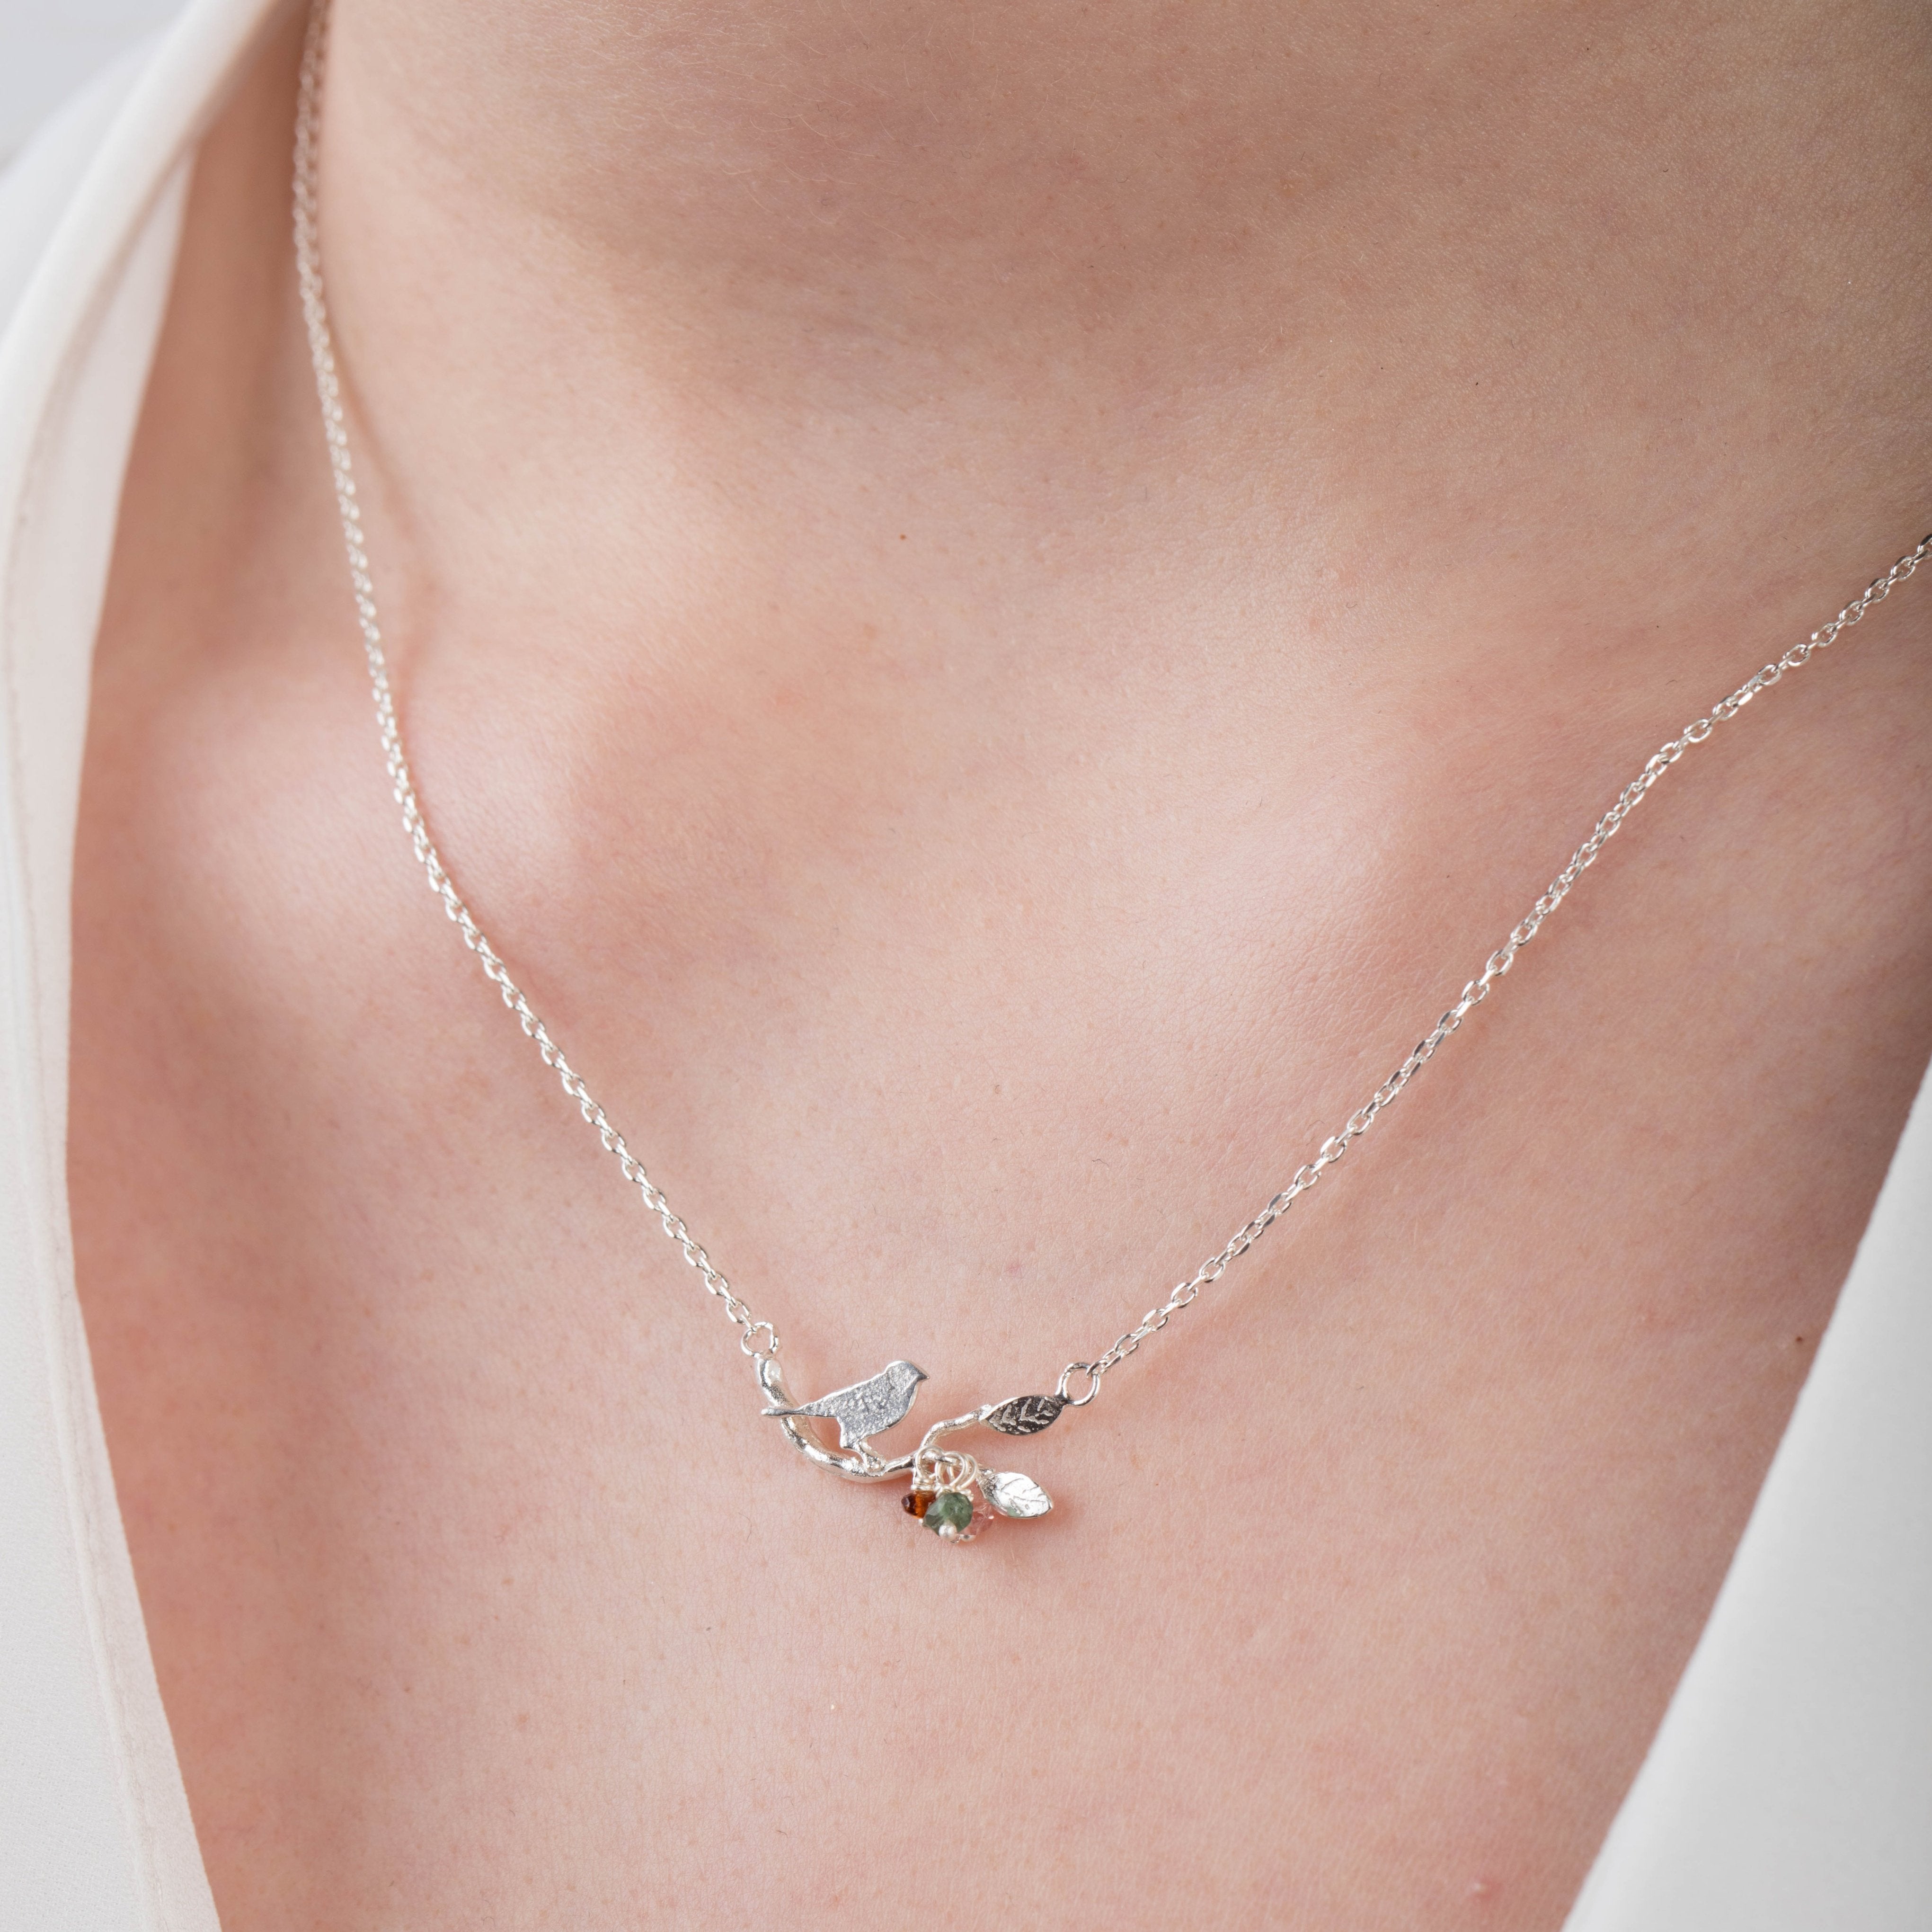 Tiny Sterling Silver Bird On A Branch Necklace